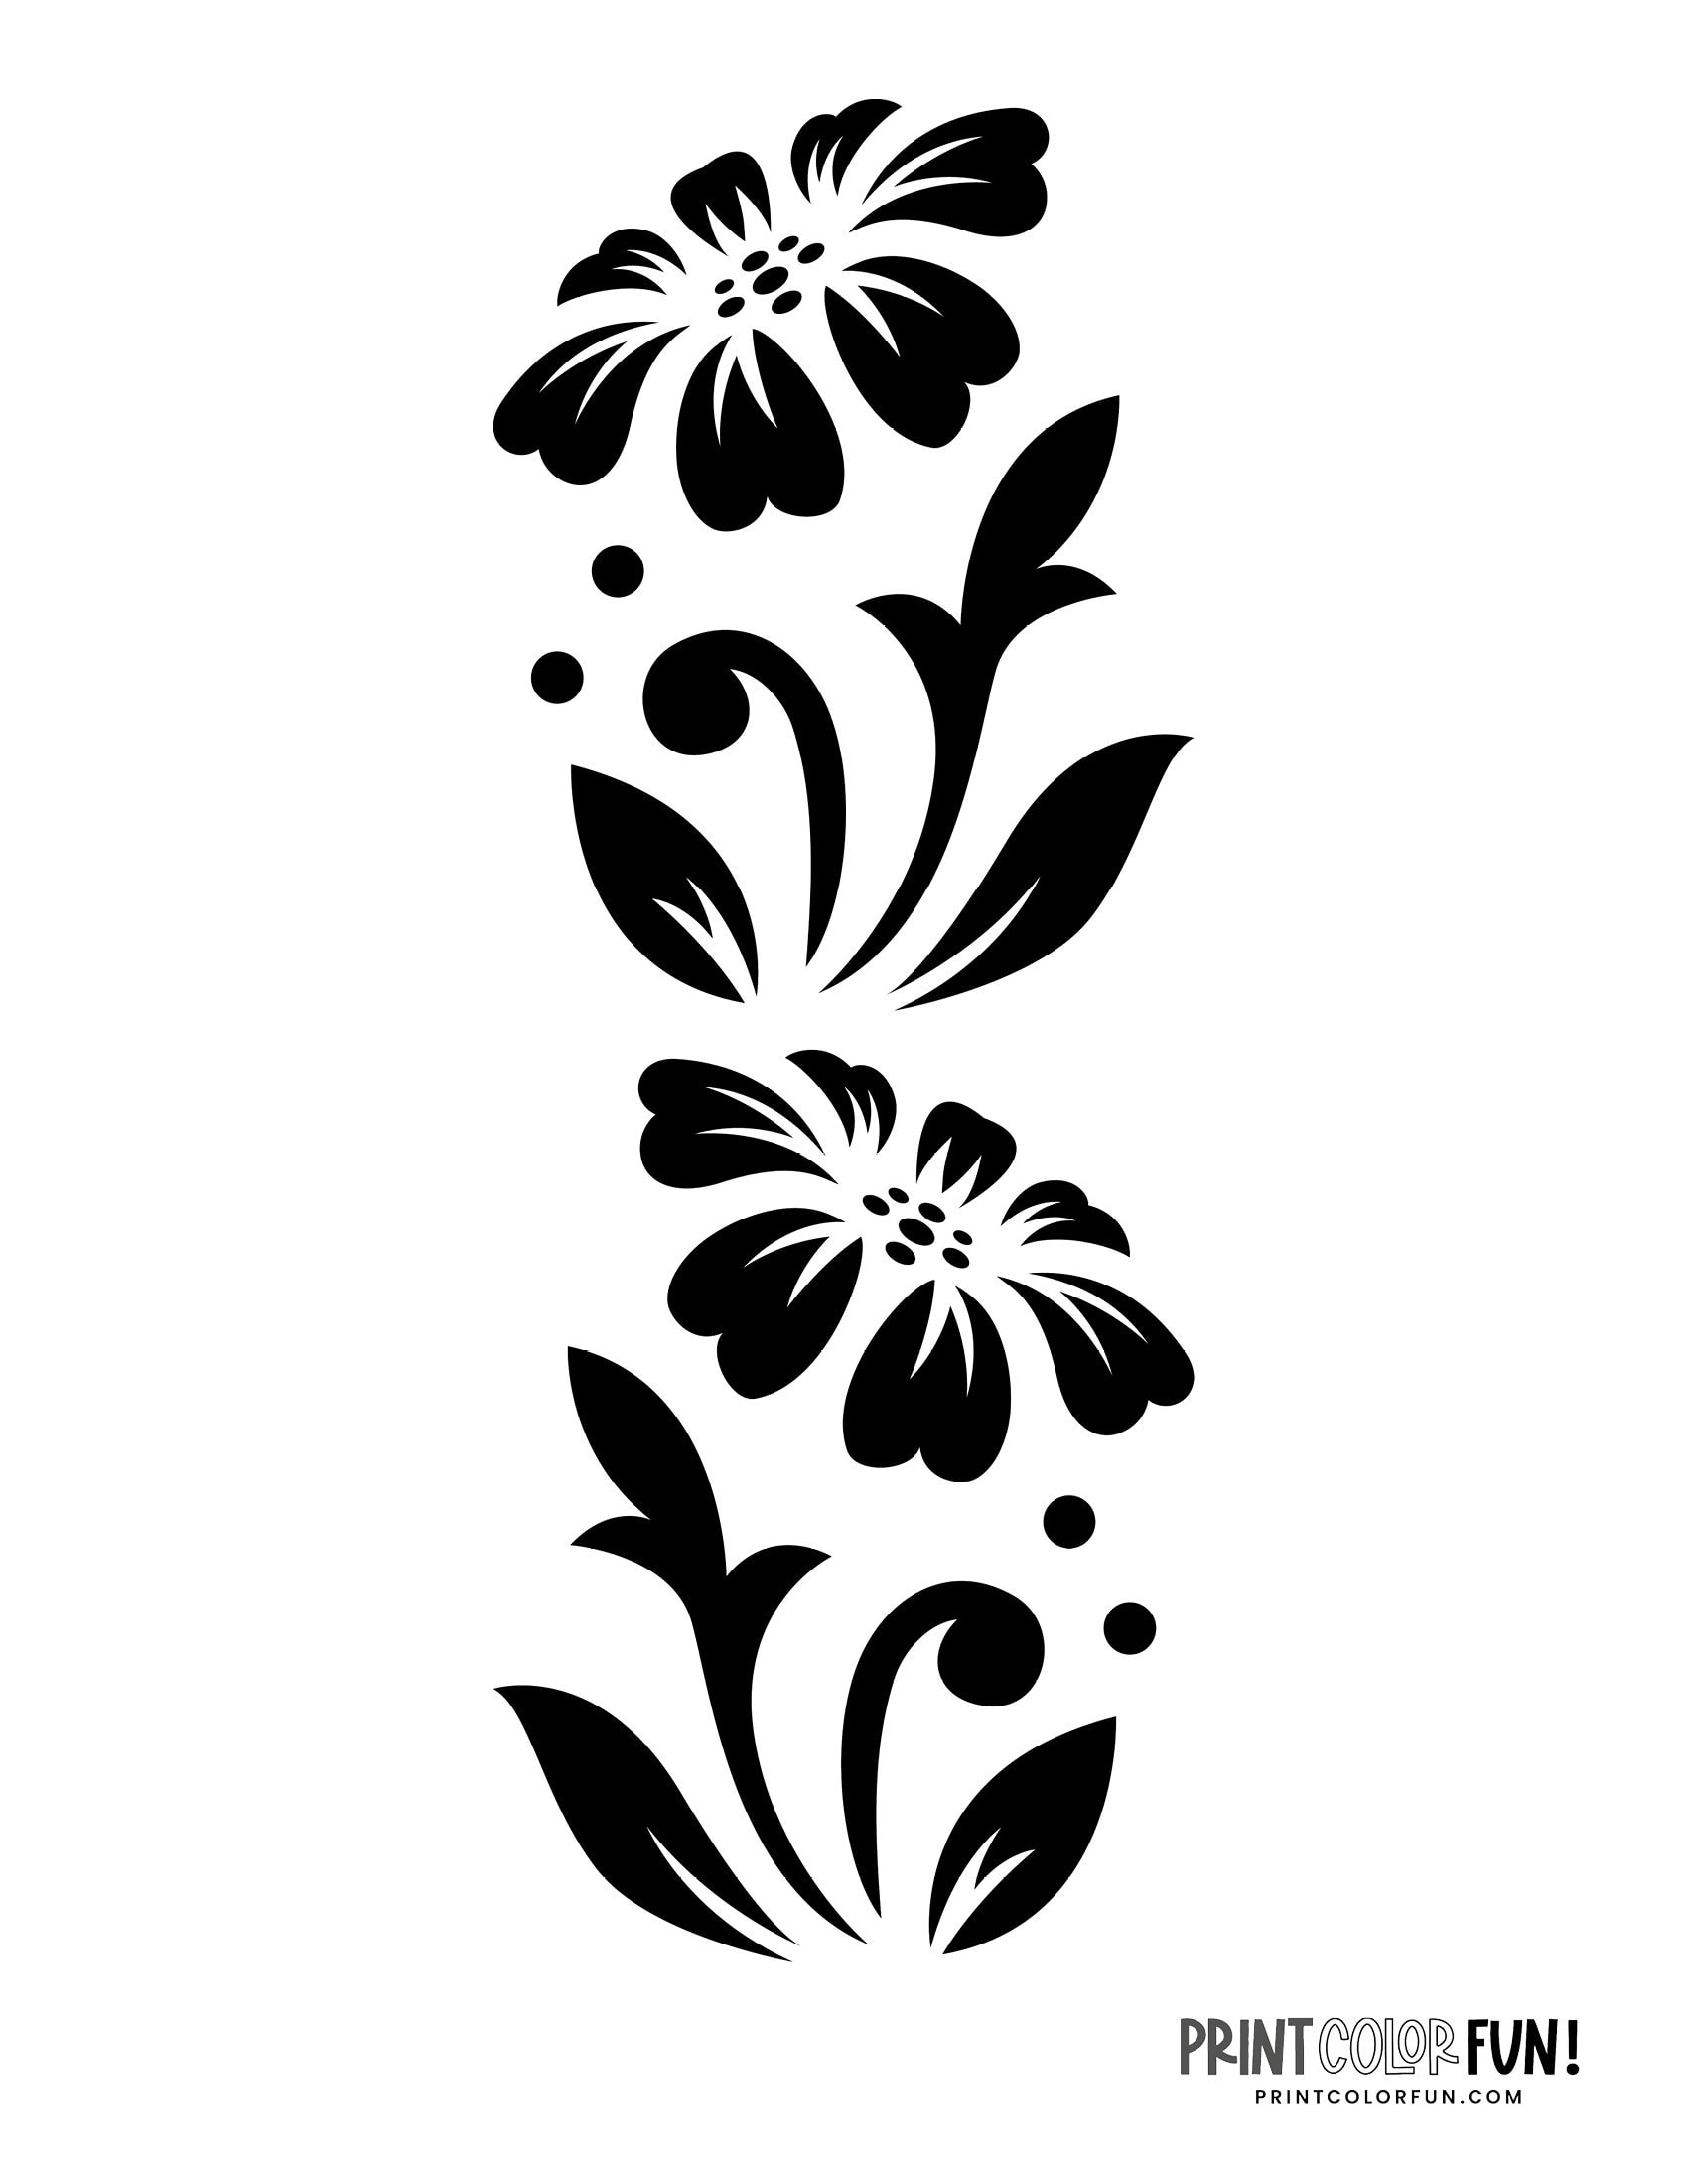 10-free-flower-stencil-designs-for-printing-craft-projects-at-printcolorfun